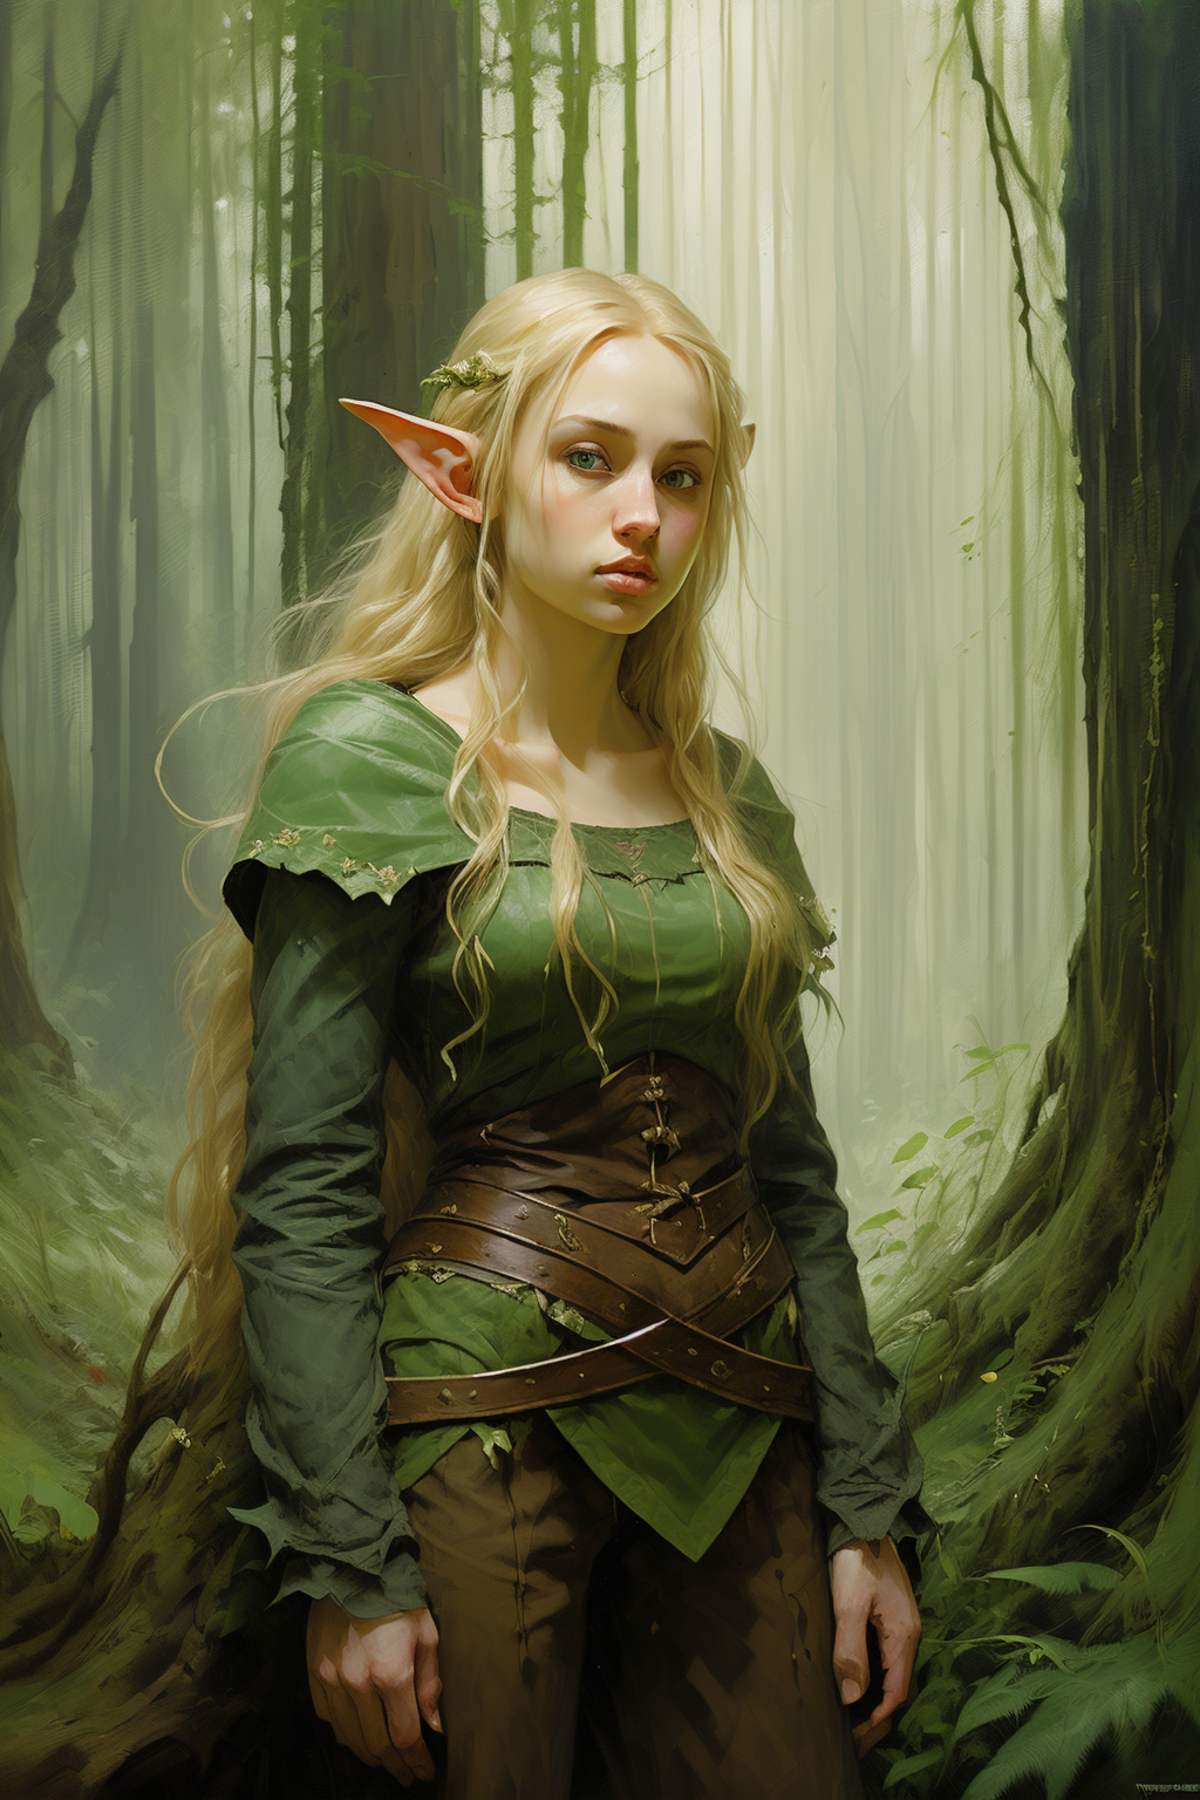 A beautifully painted elf woman is standing in a forest.